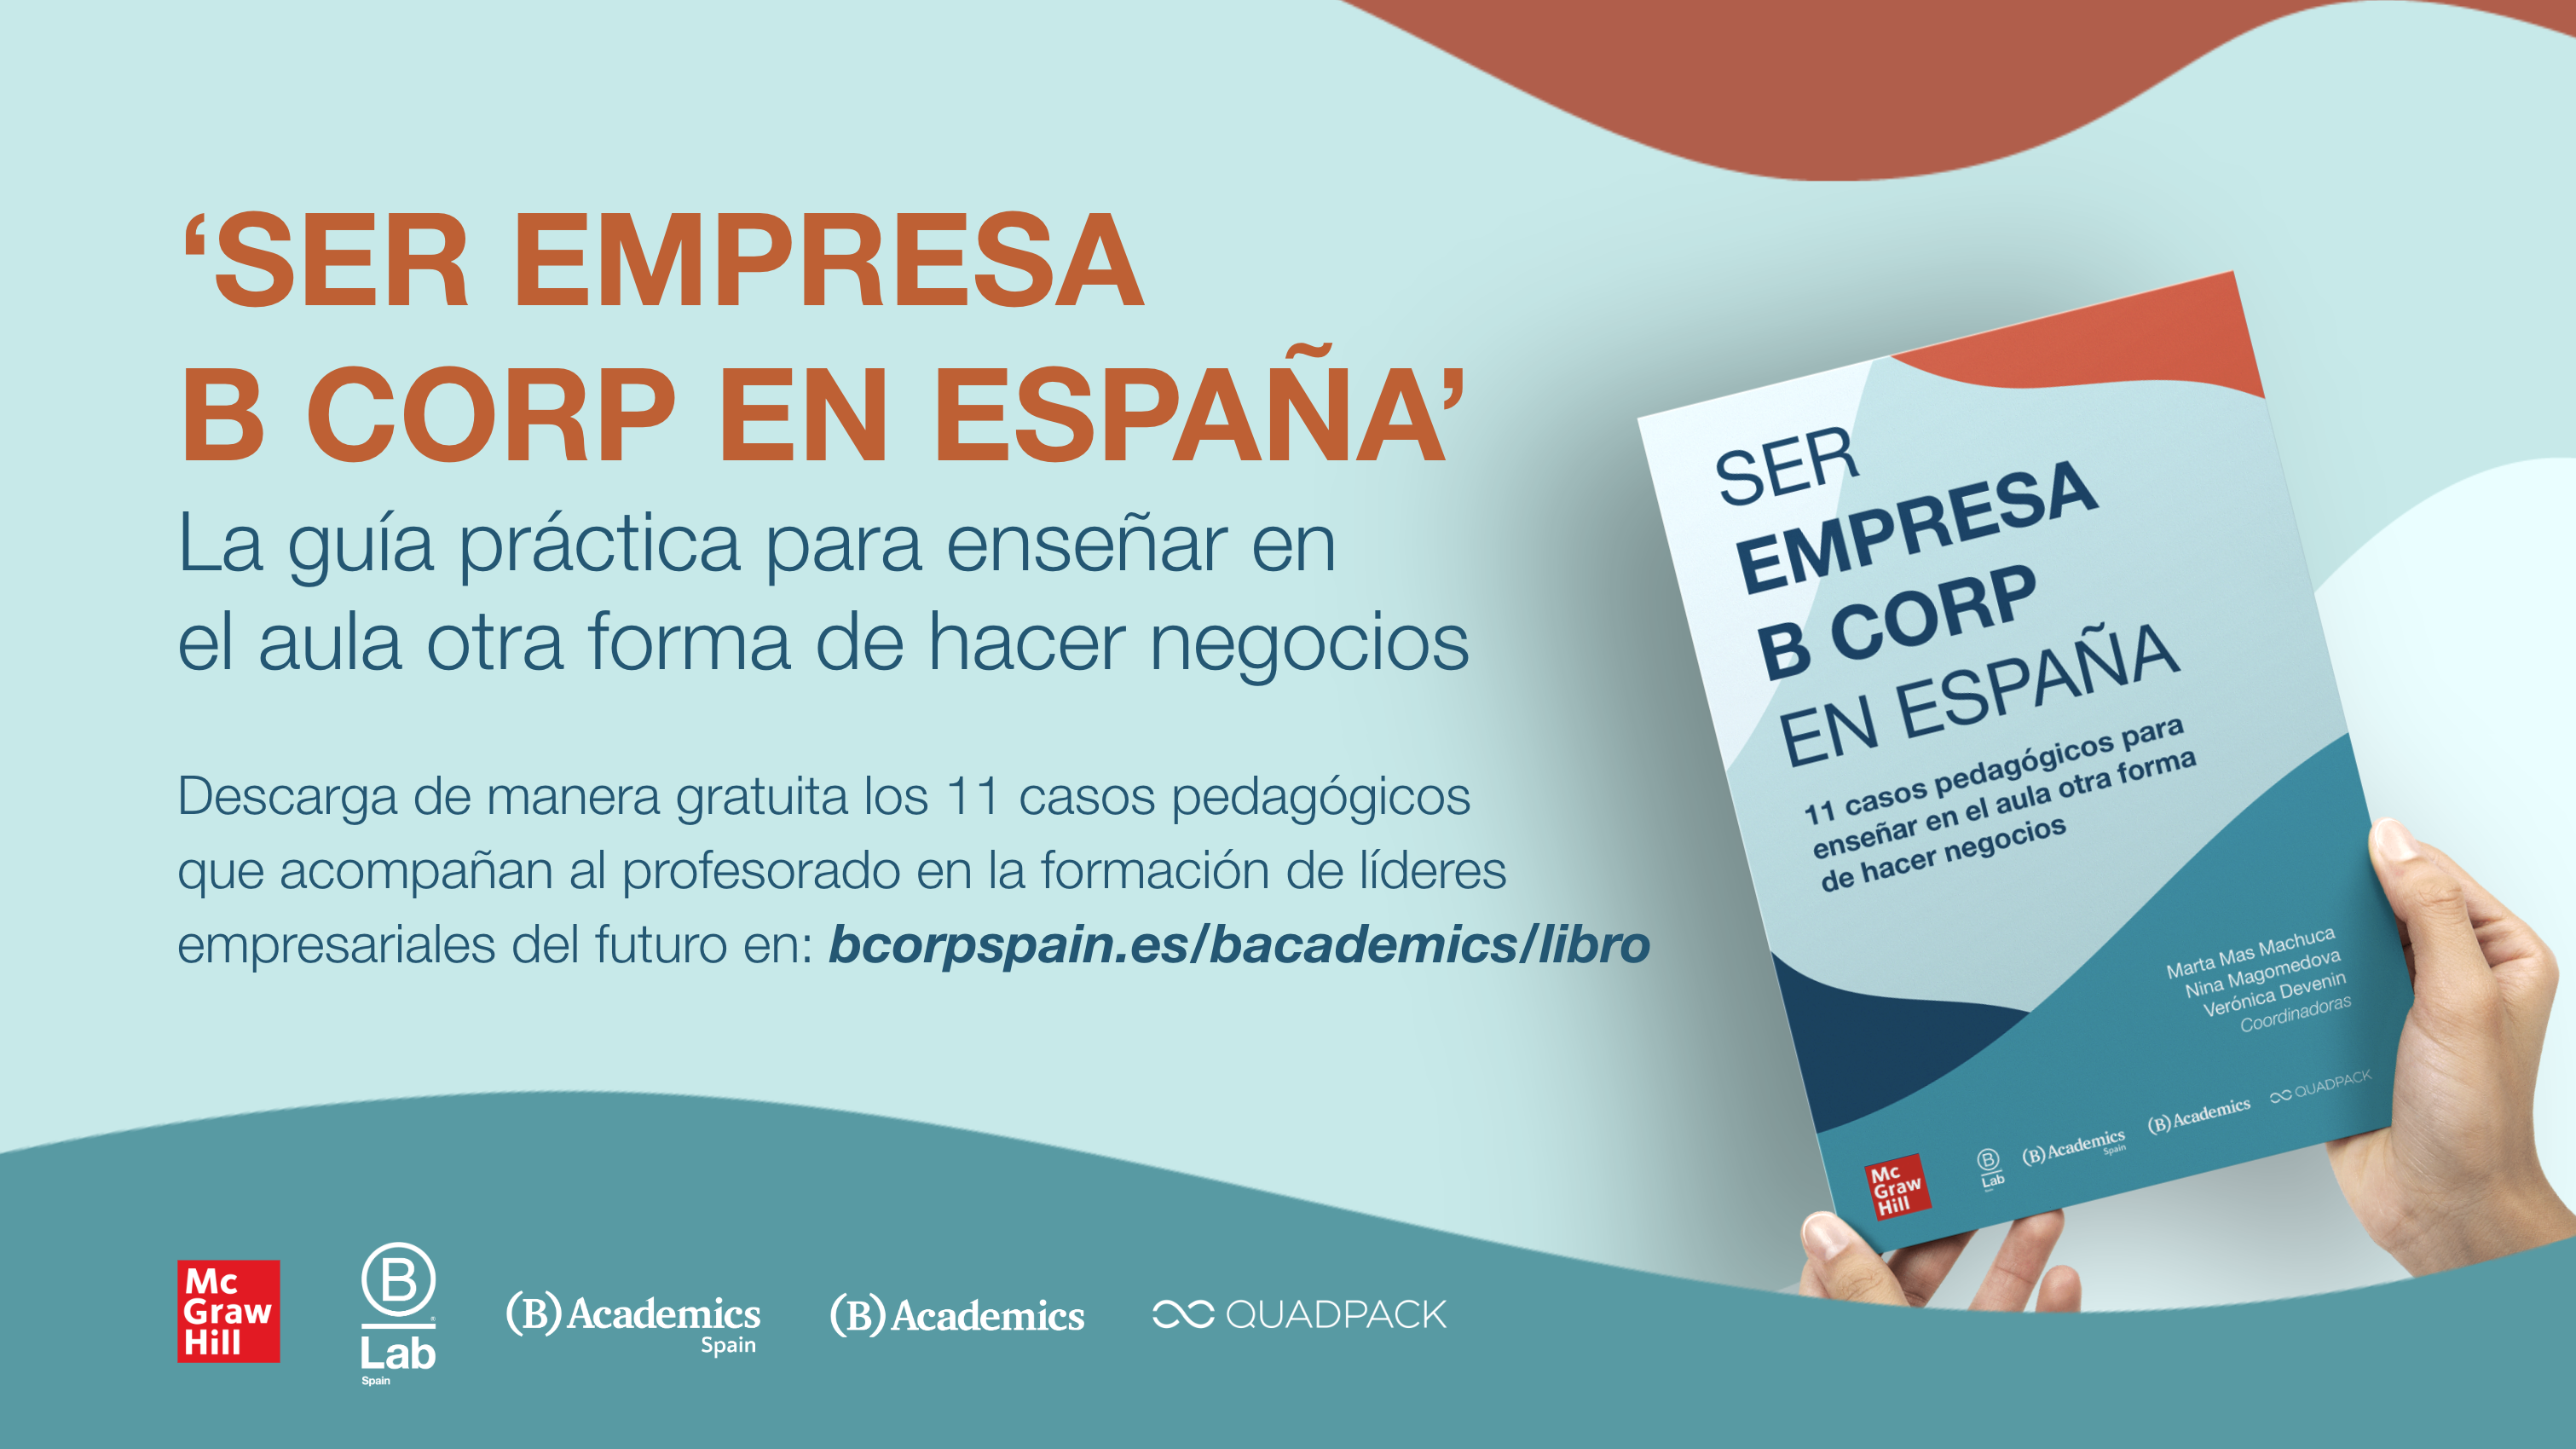 Discover the new book from B Academics: “Being a B Corp in Spain”